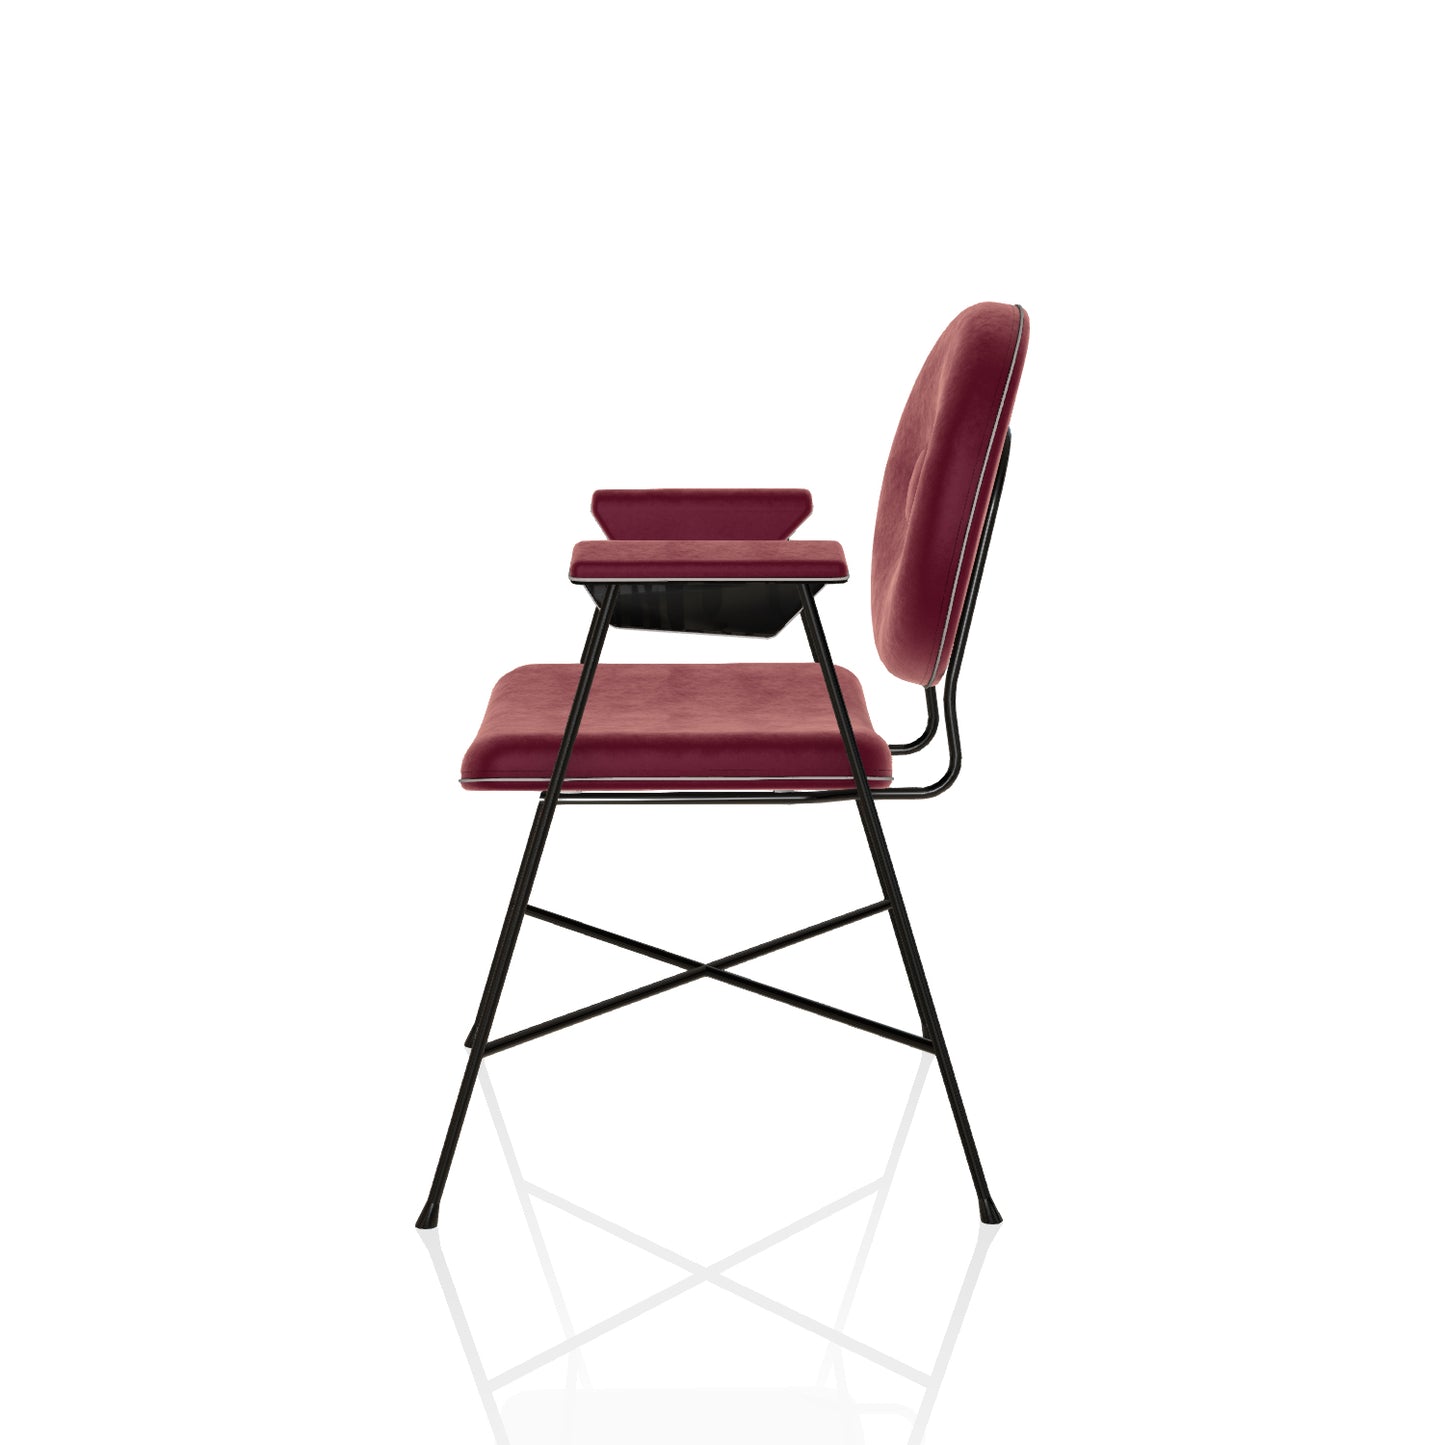 Penelope Chair With Arms By Bontempi Casa - Purple Red Velvet With Glossy Black Base